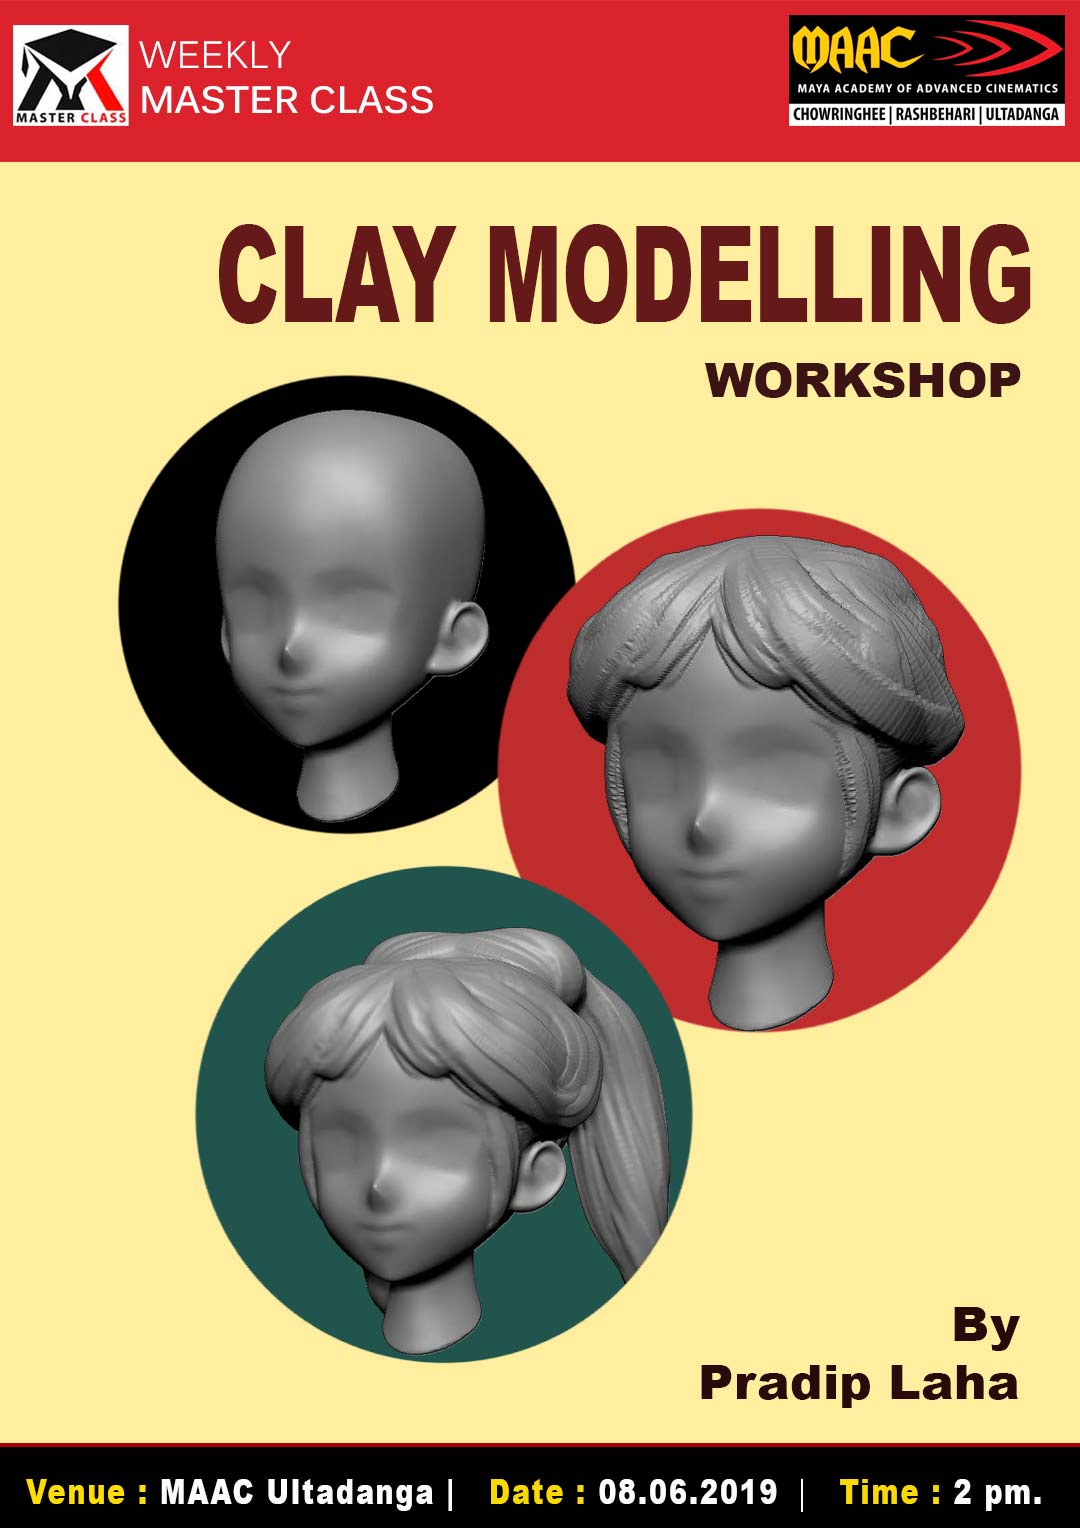 Weekly Master Class on Clay Modeling Workshop